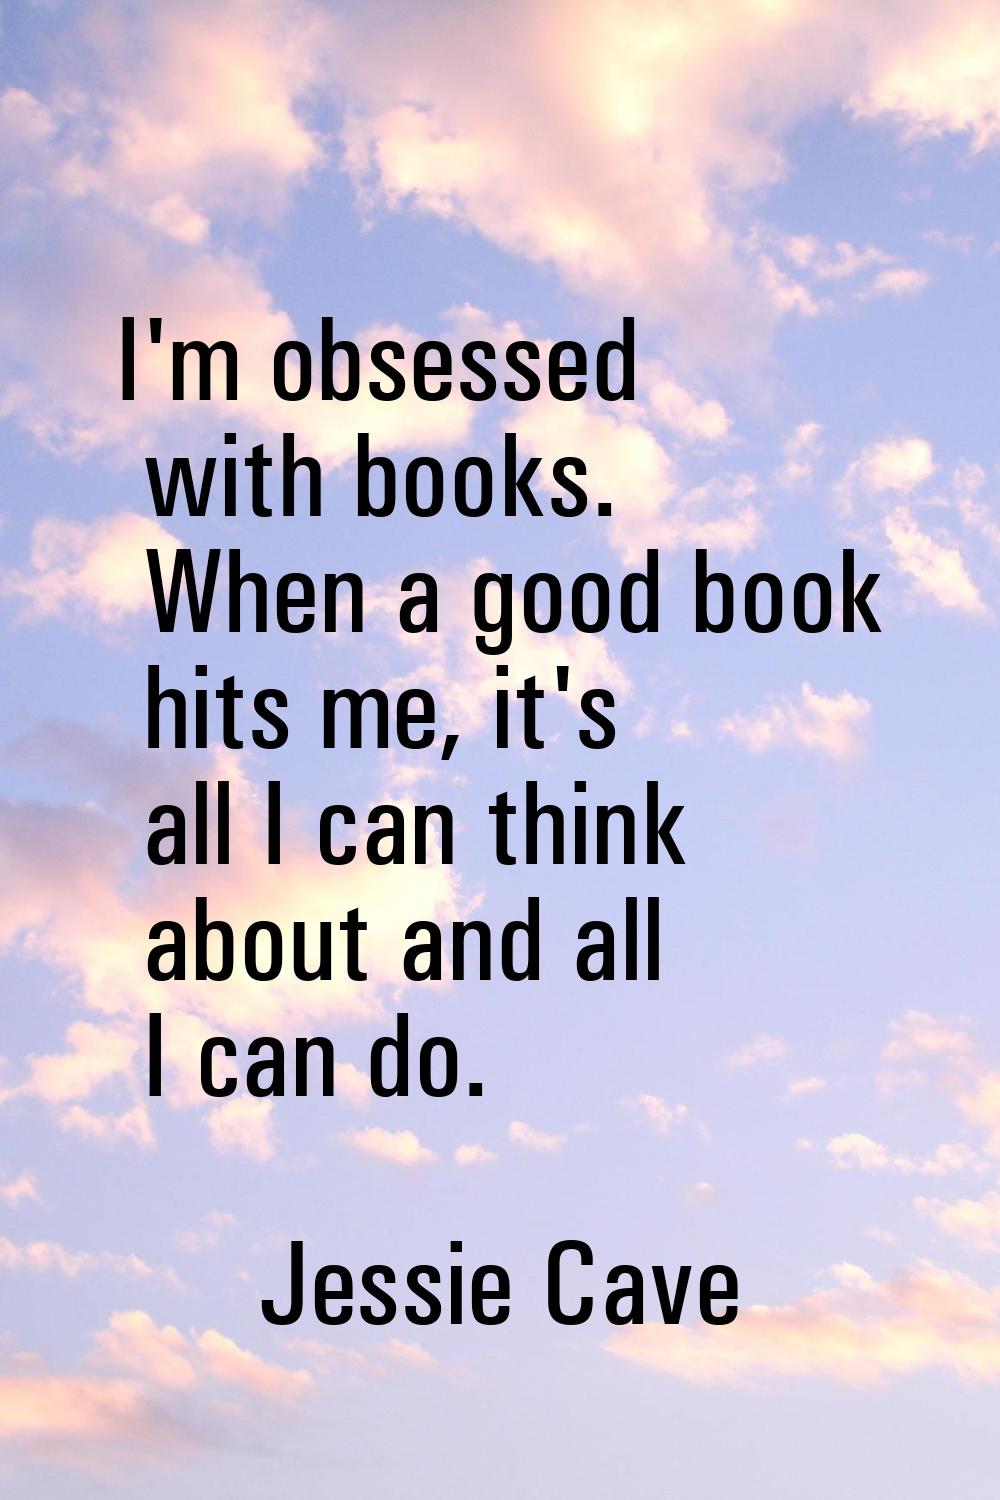 I'm obsessed with books. When a good book hits me, it's all I can think about and all I can do.